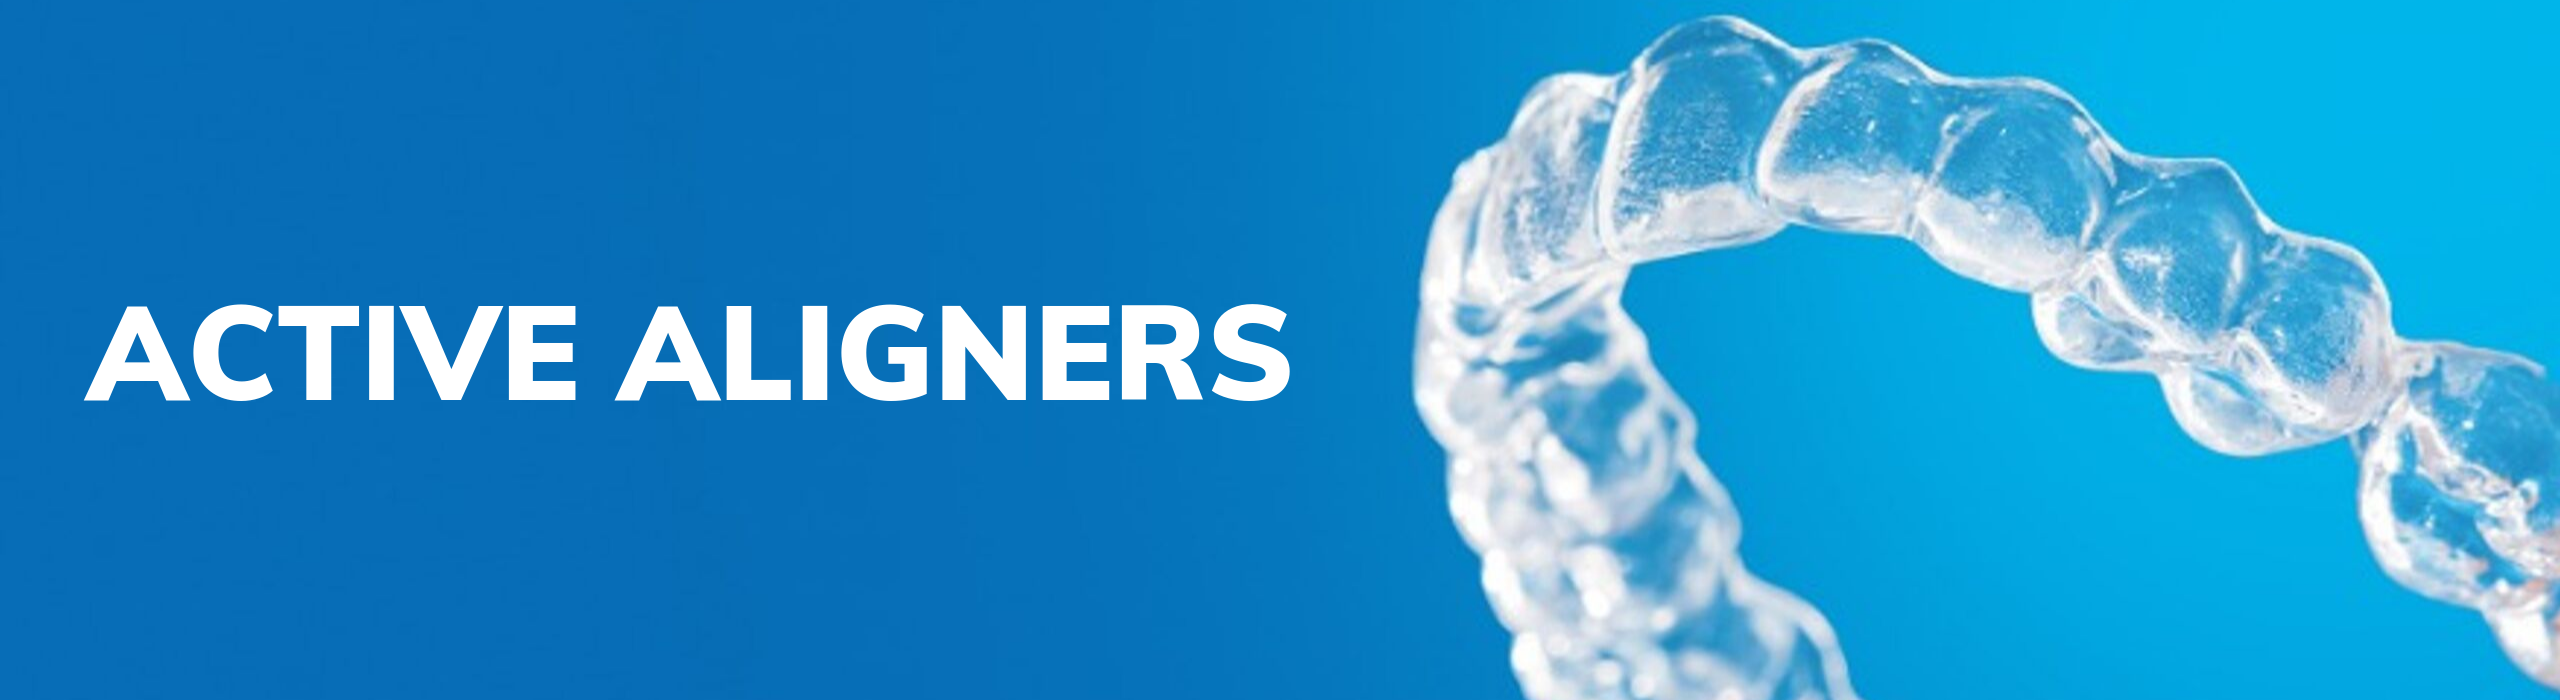 marketing clear aligners